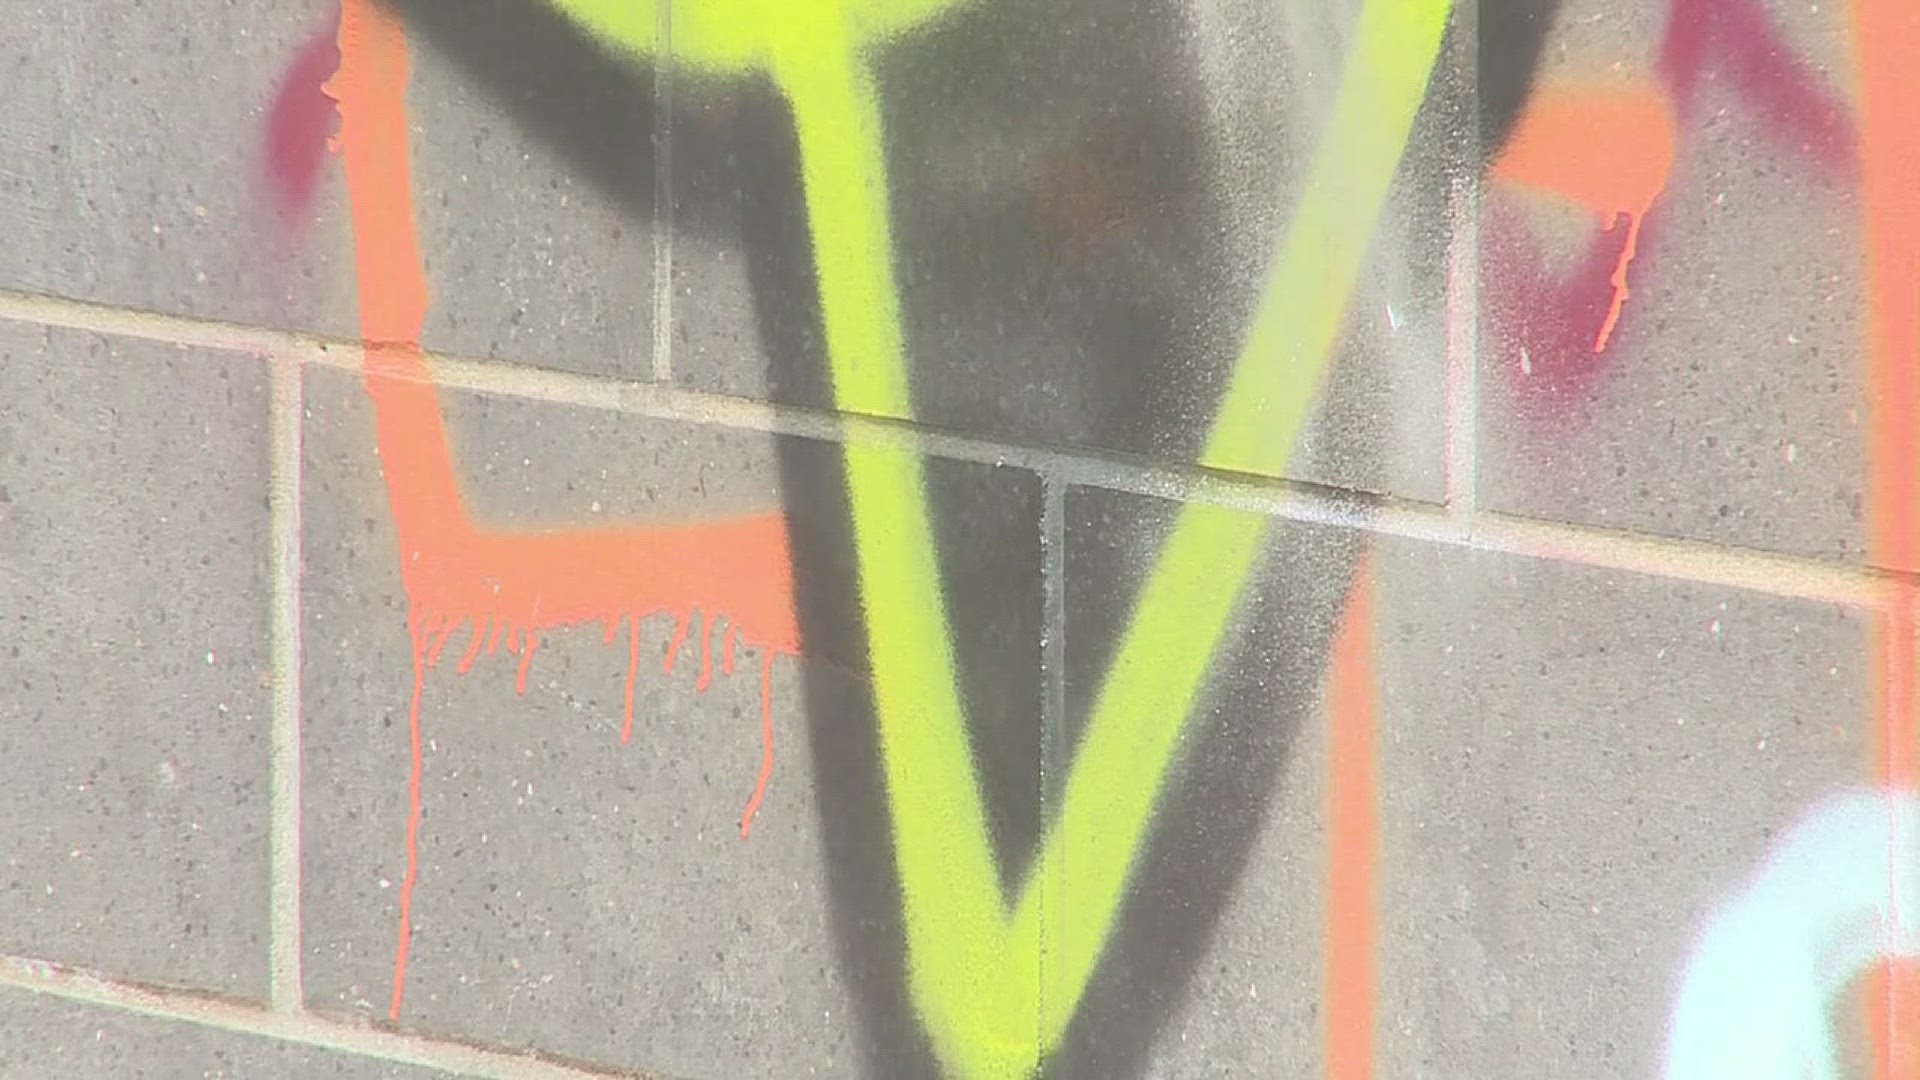 Tagging is a growing problem in Louisville